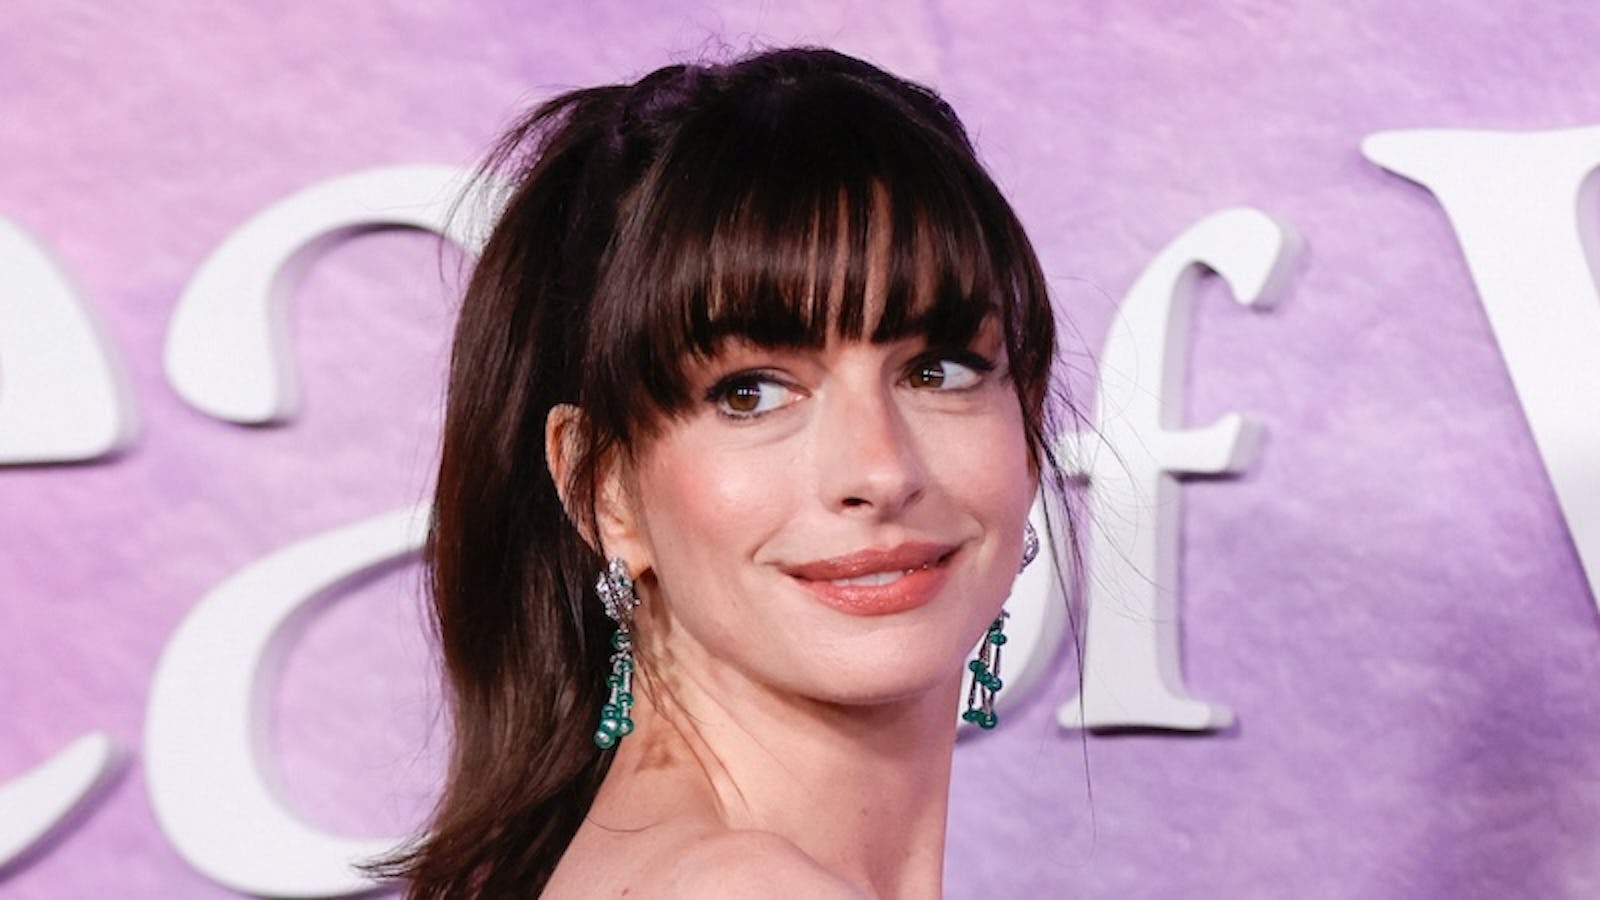 Anne Hathaway at the "Idea Of You" New York premiere